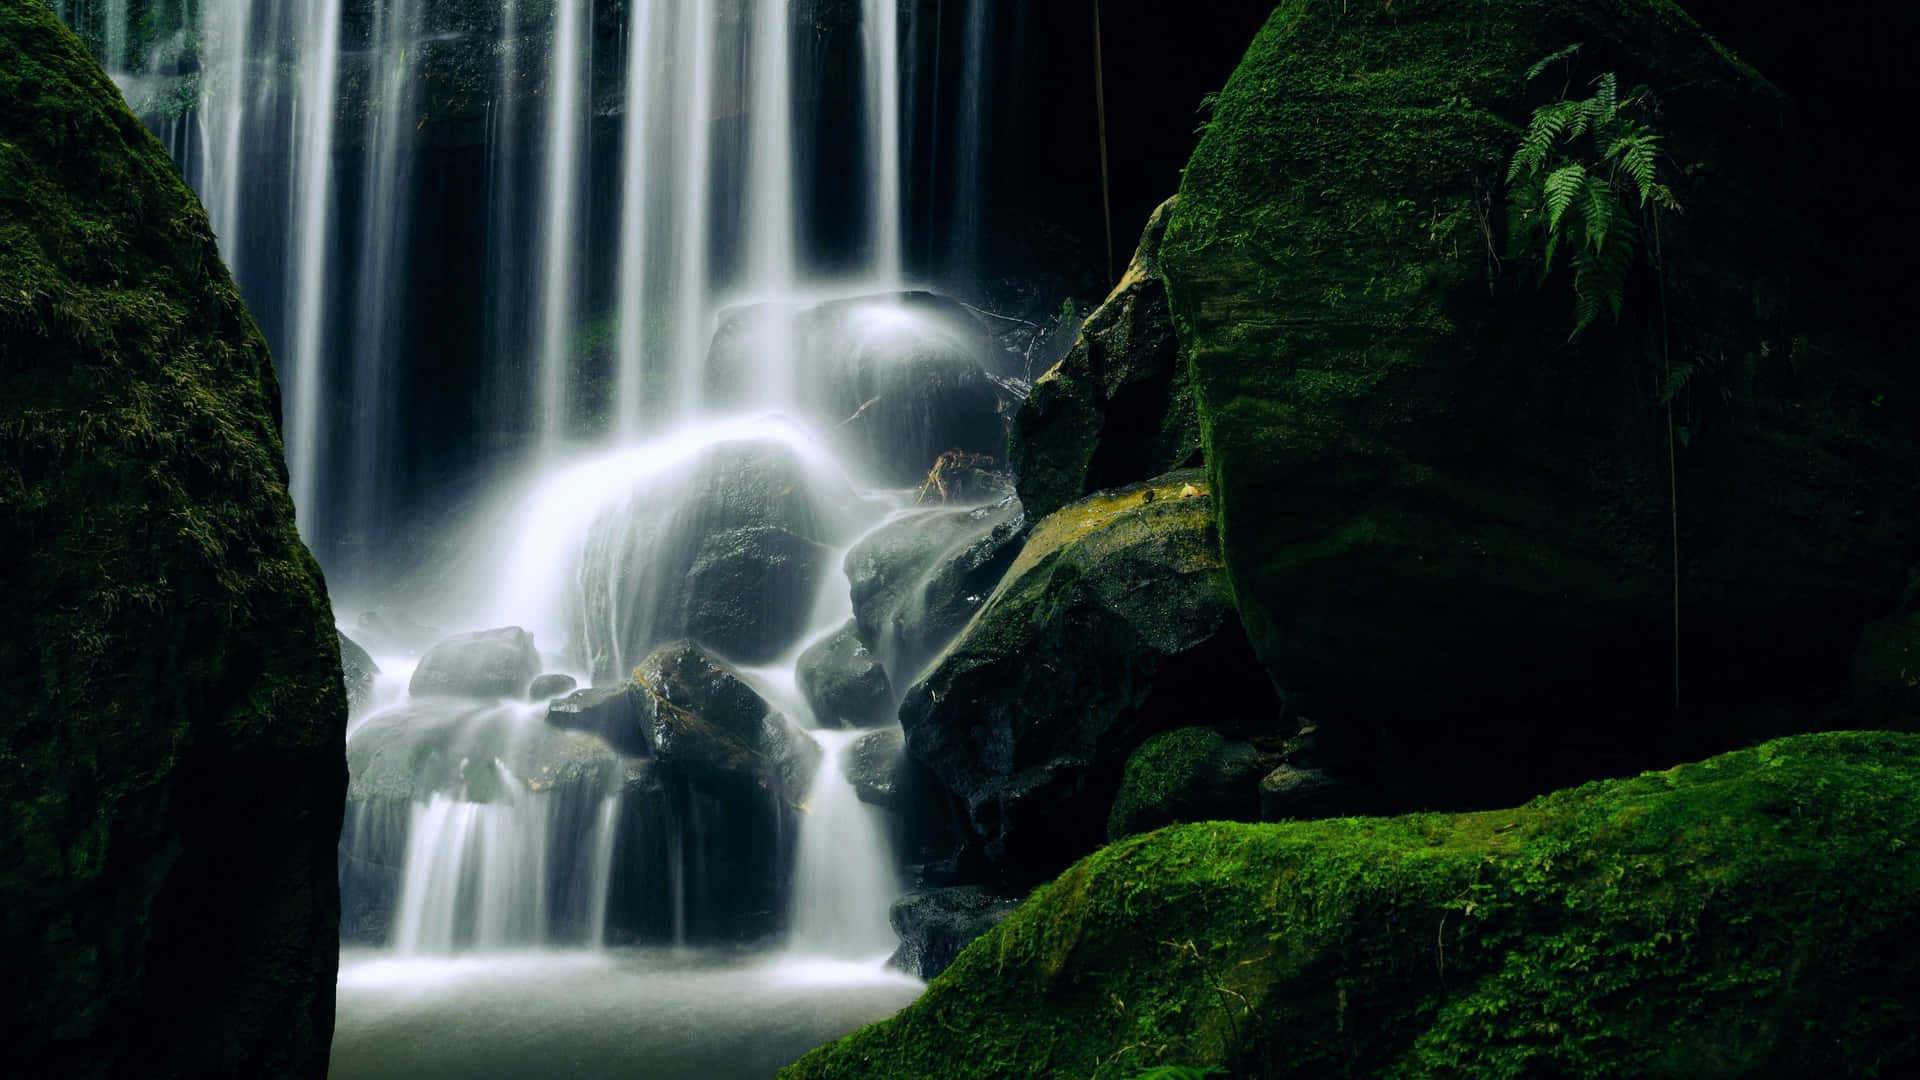 Spectacular 4k Image Of A Lush Waterfall Wallpaper